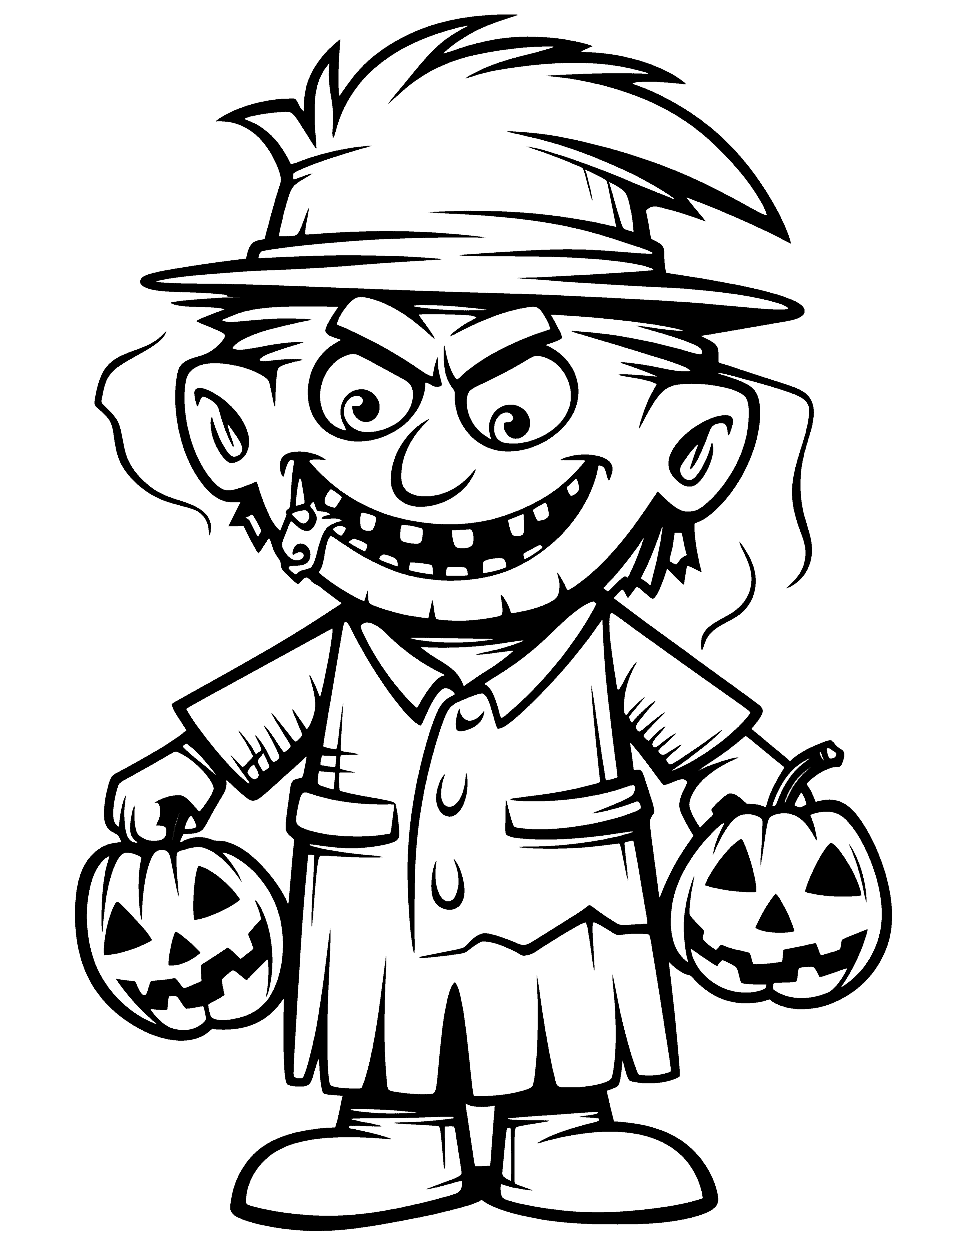 Funny Frankenstein Halloween Coloring Page - A comical image of Frankenstein’s monster with exaggerated features, perfect for kids who like their Halloween more fun than scary.